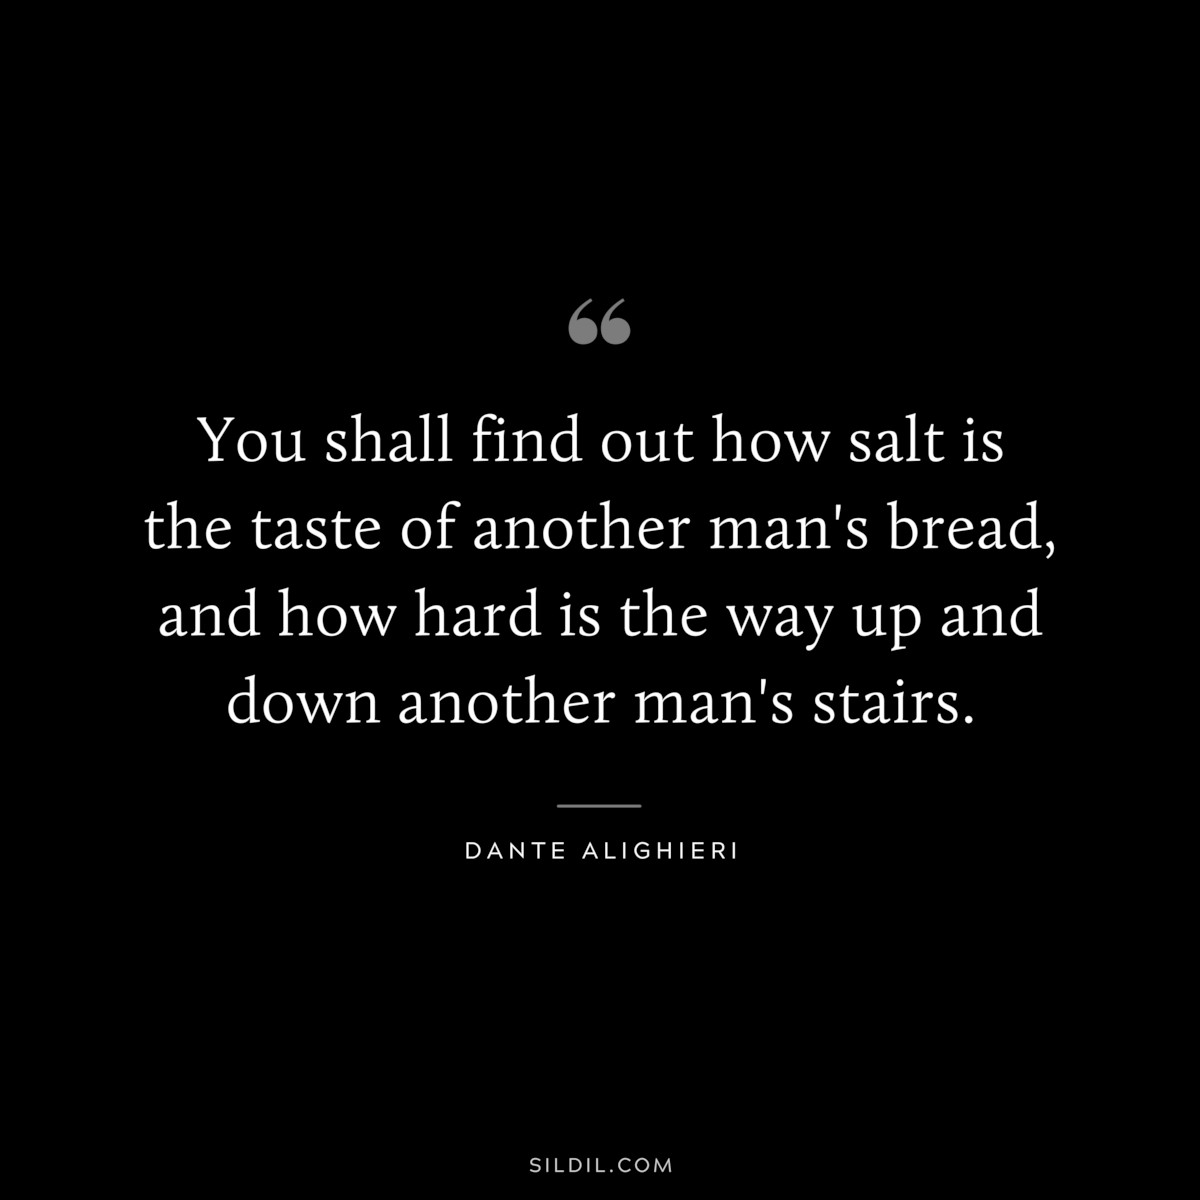 You shall find out how salt is the taste of another man's bread, and how hard is the way up and down another man's stairs. ― Dante Alighieri